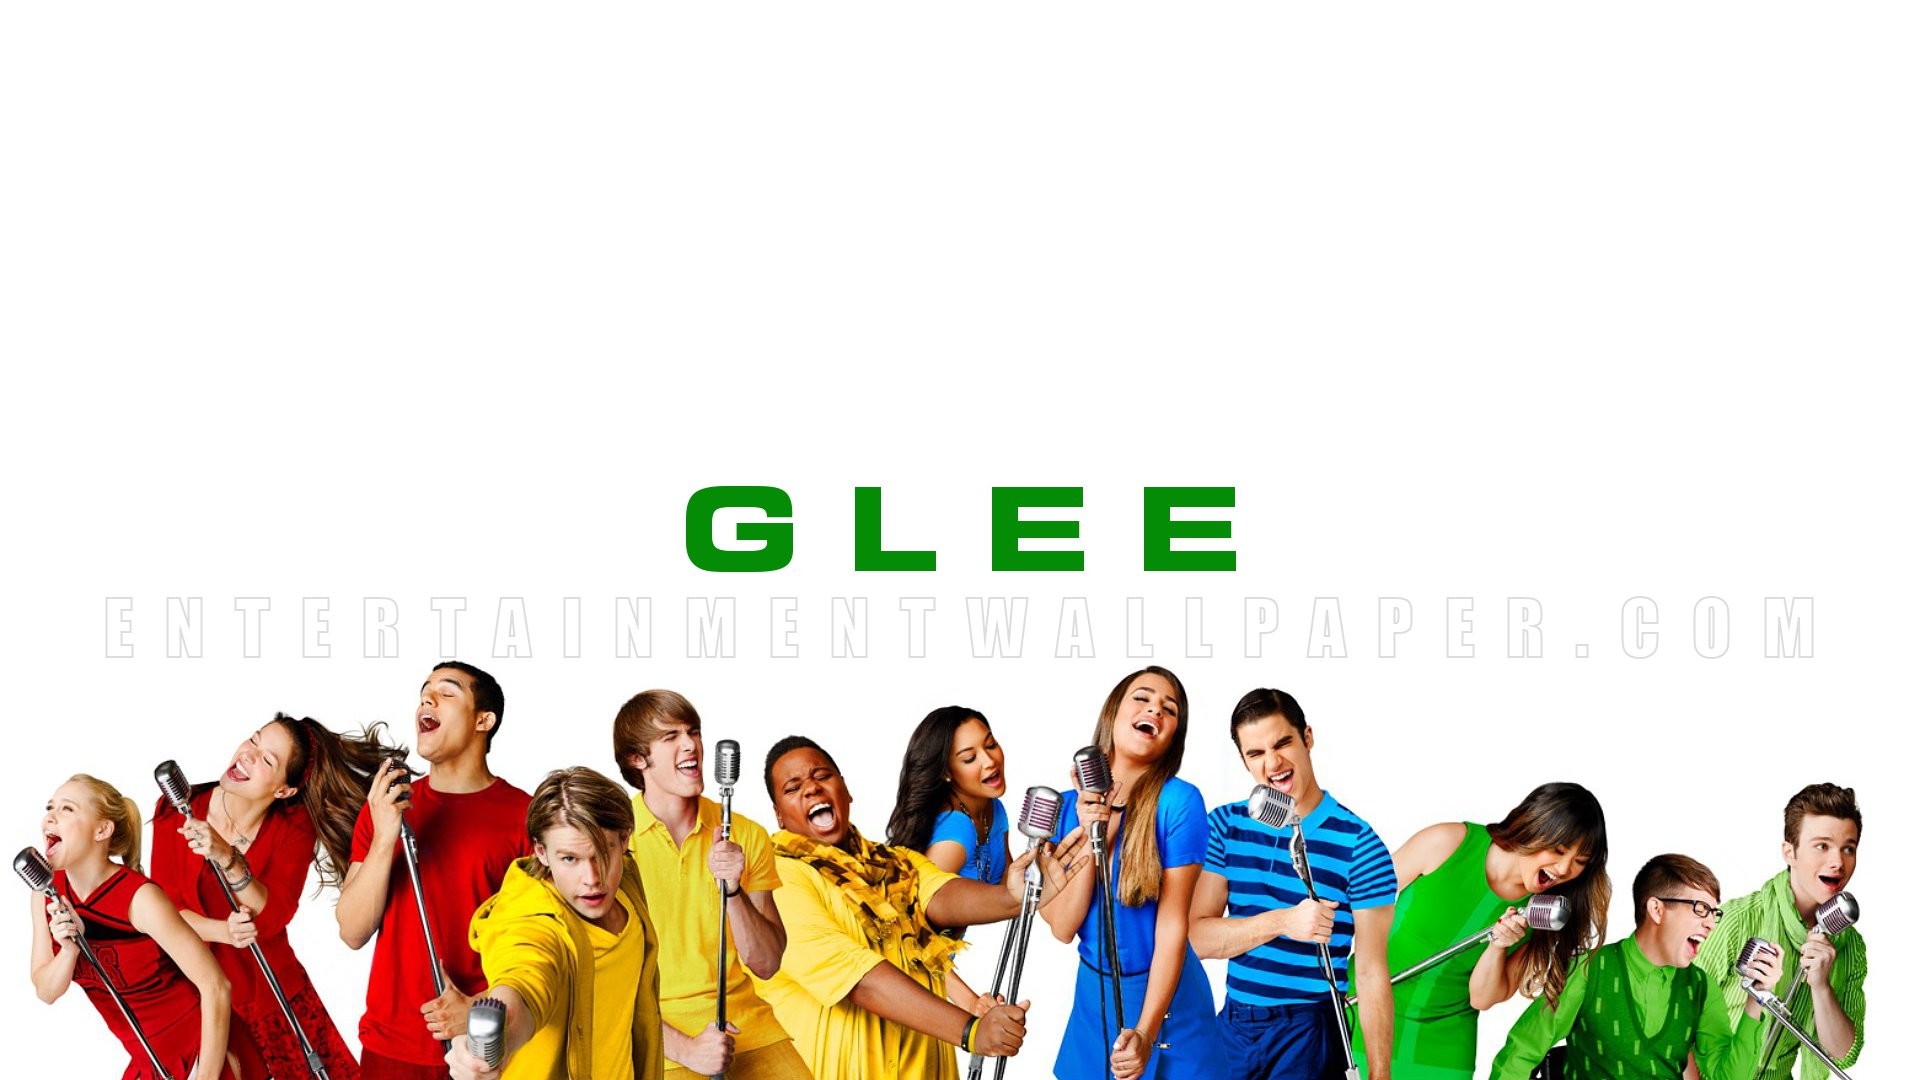 1920x1080 Free Glee Wallpaper #6792375 Glee Wallpapers, Glee Wallpapers and Pictures  Collection (34 ) ...